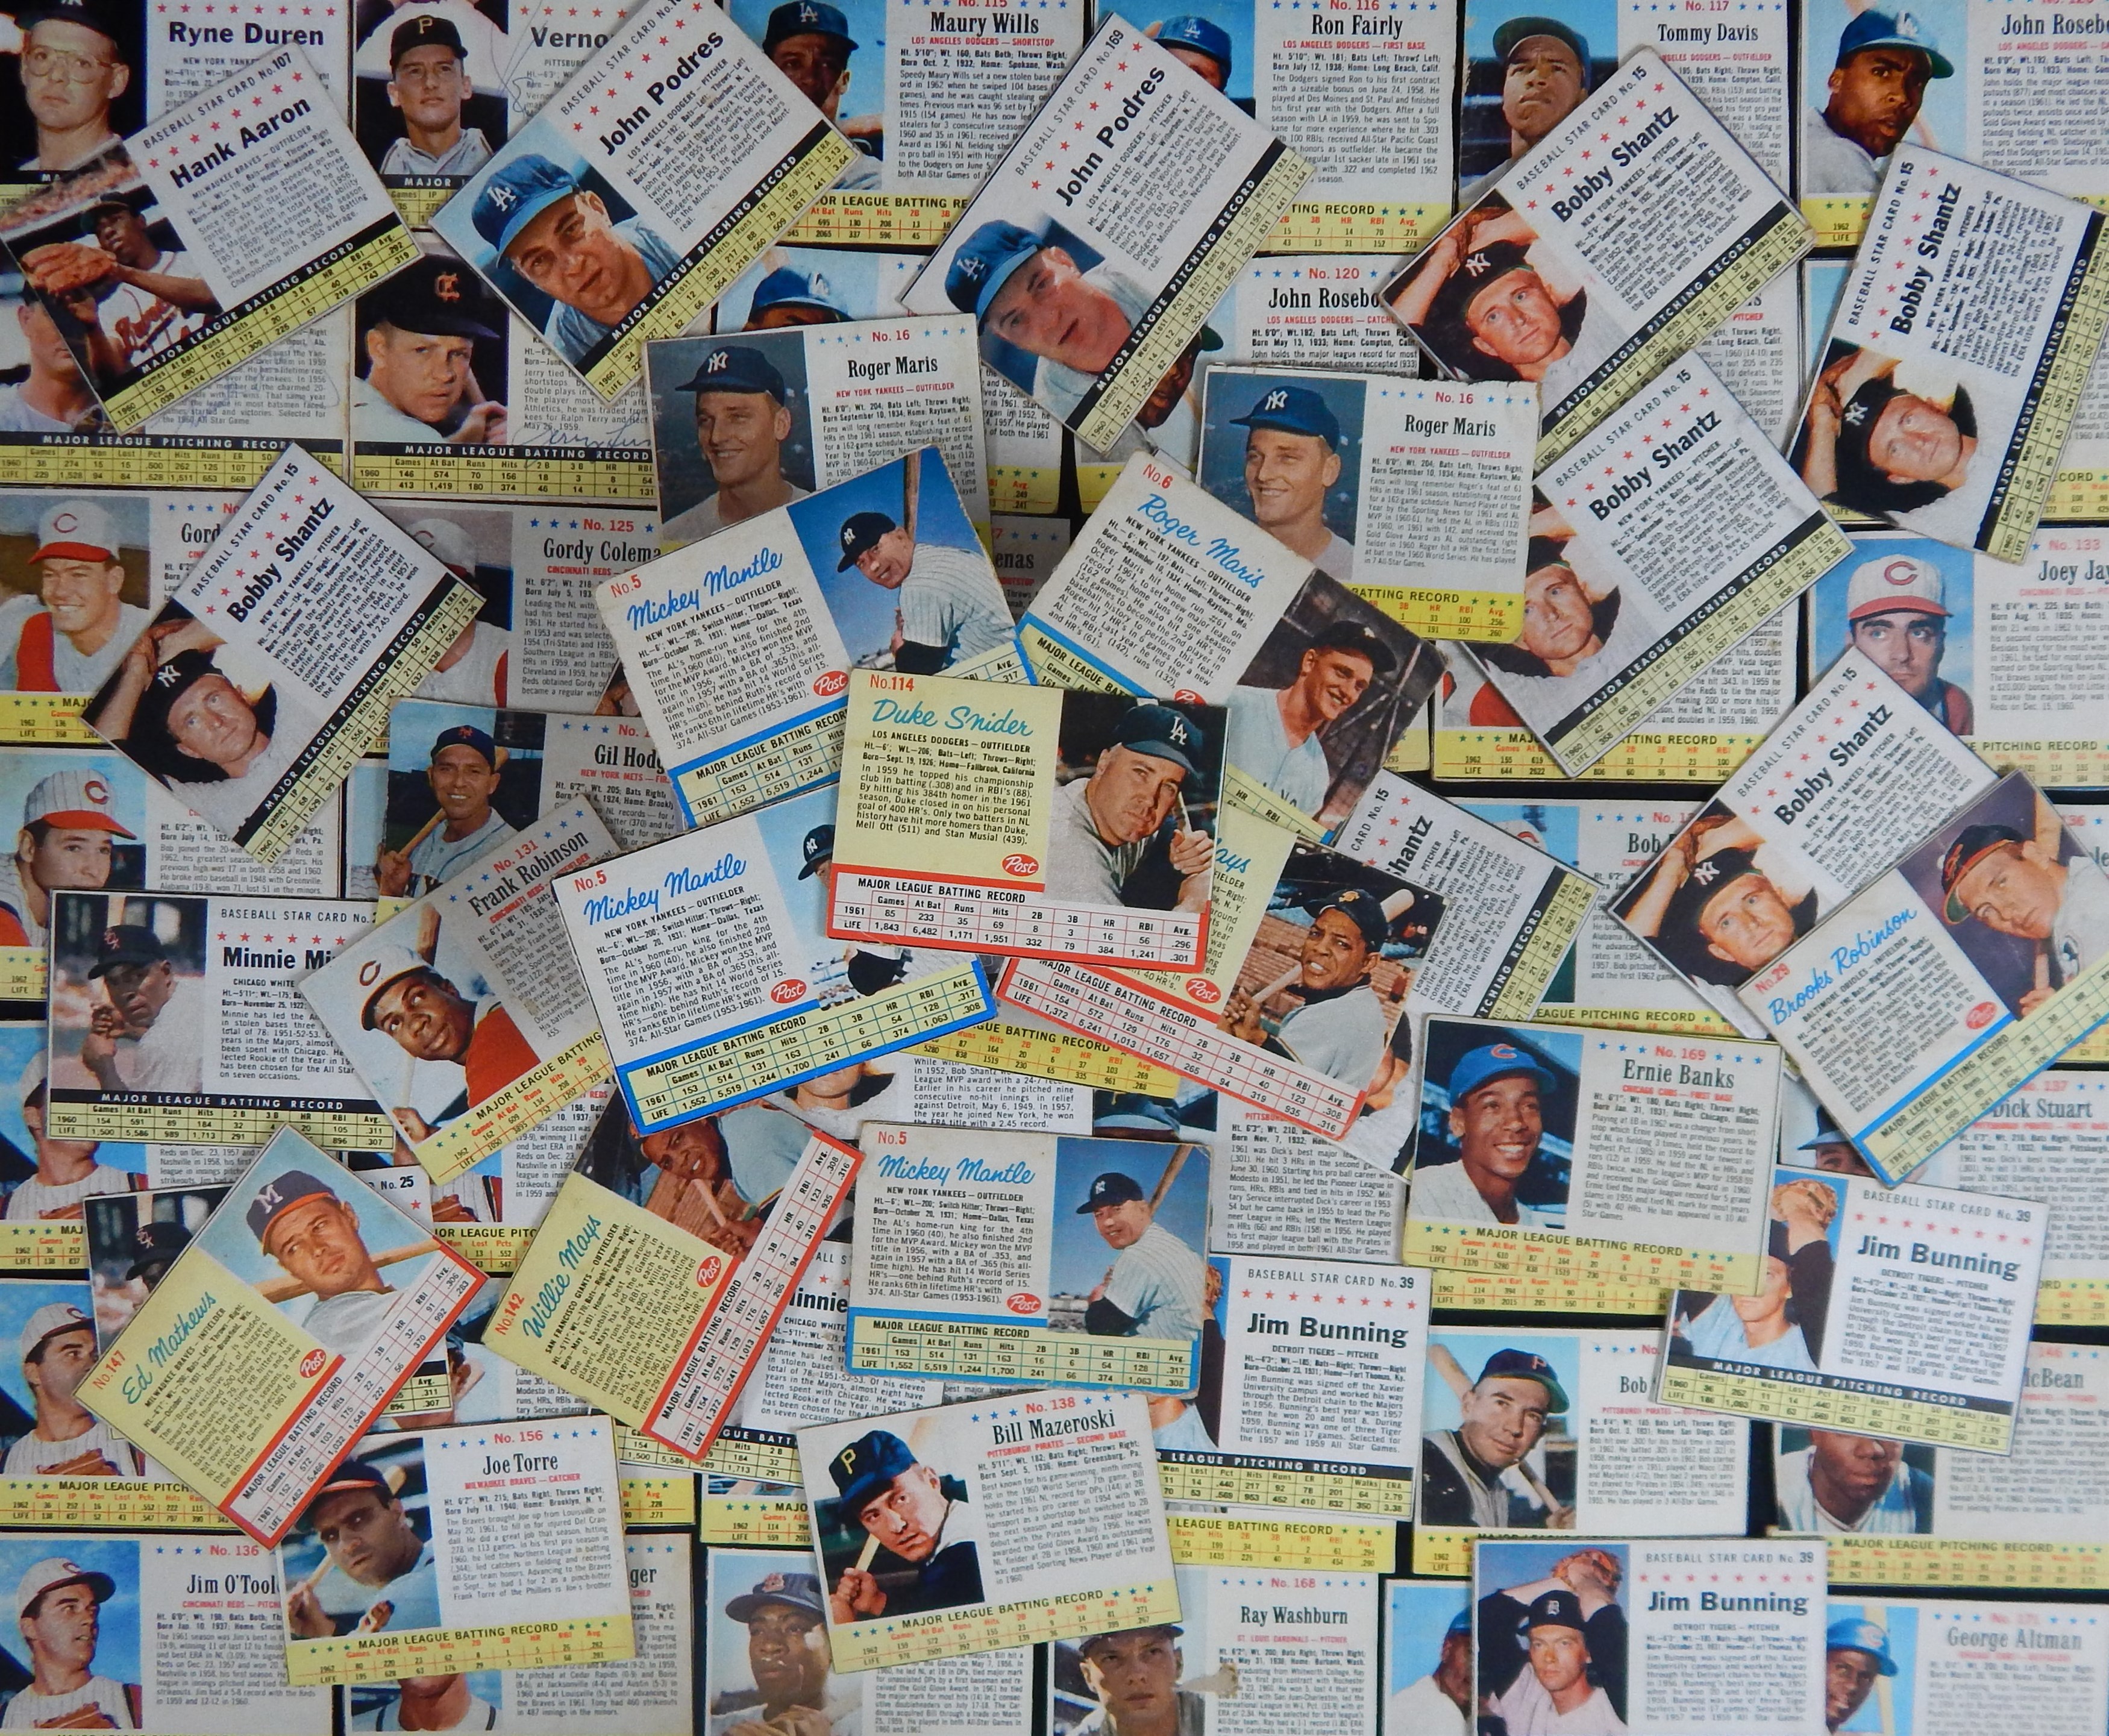 Baseball and Trading Cards - 1961-63 Post Cereal Baseball Card Collection (840)